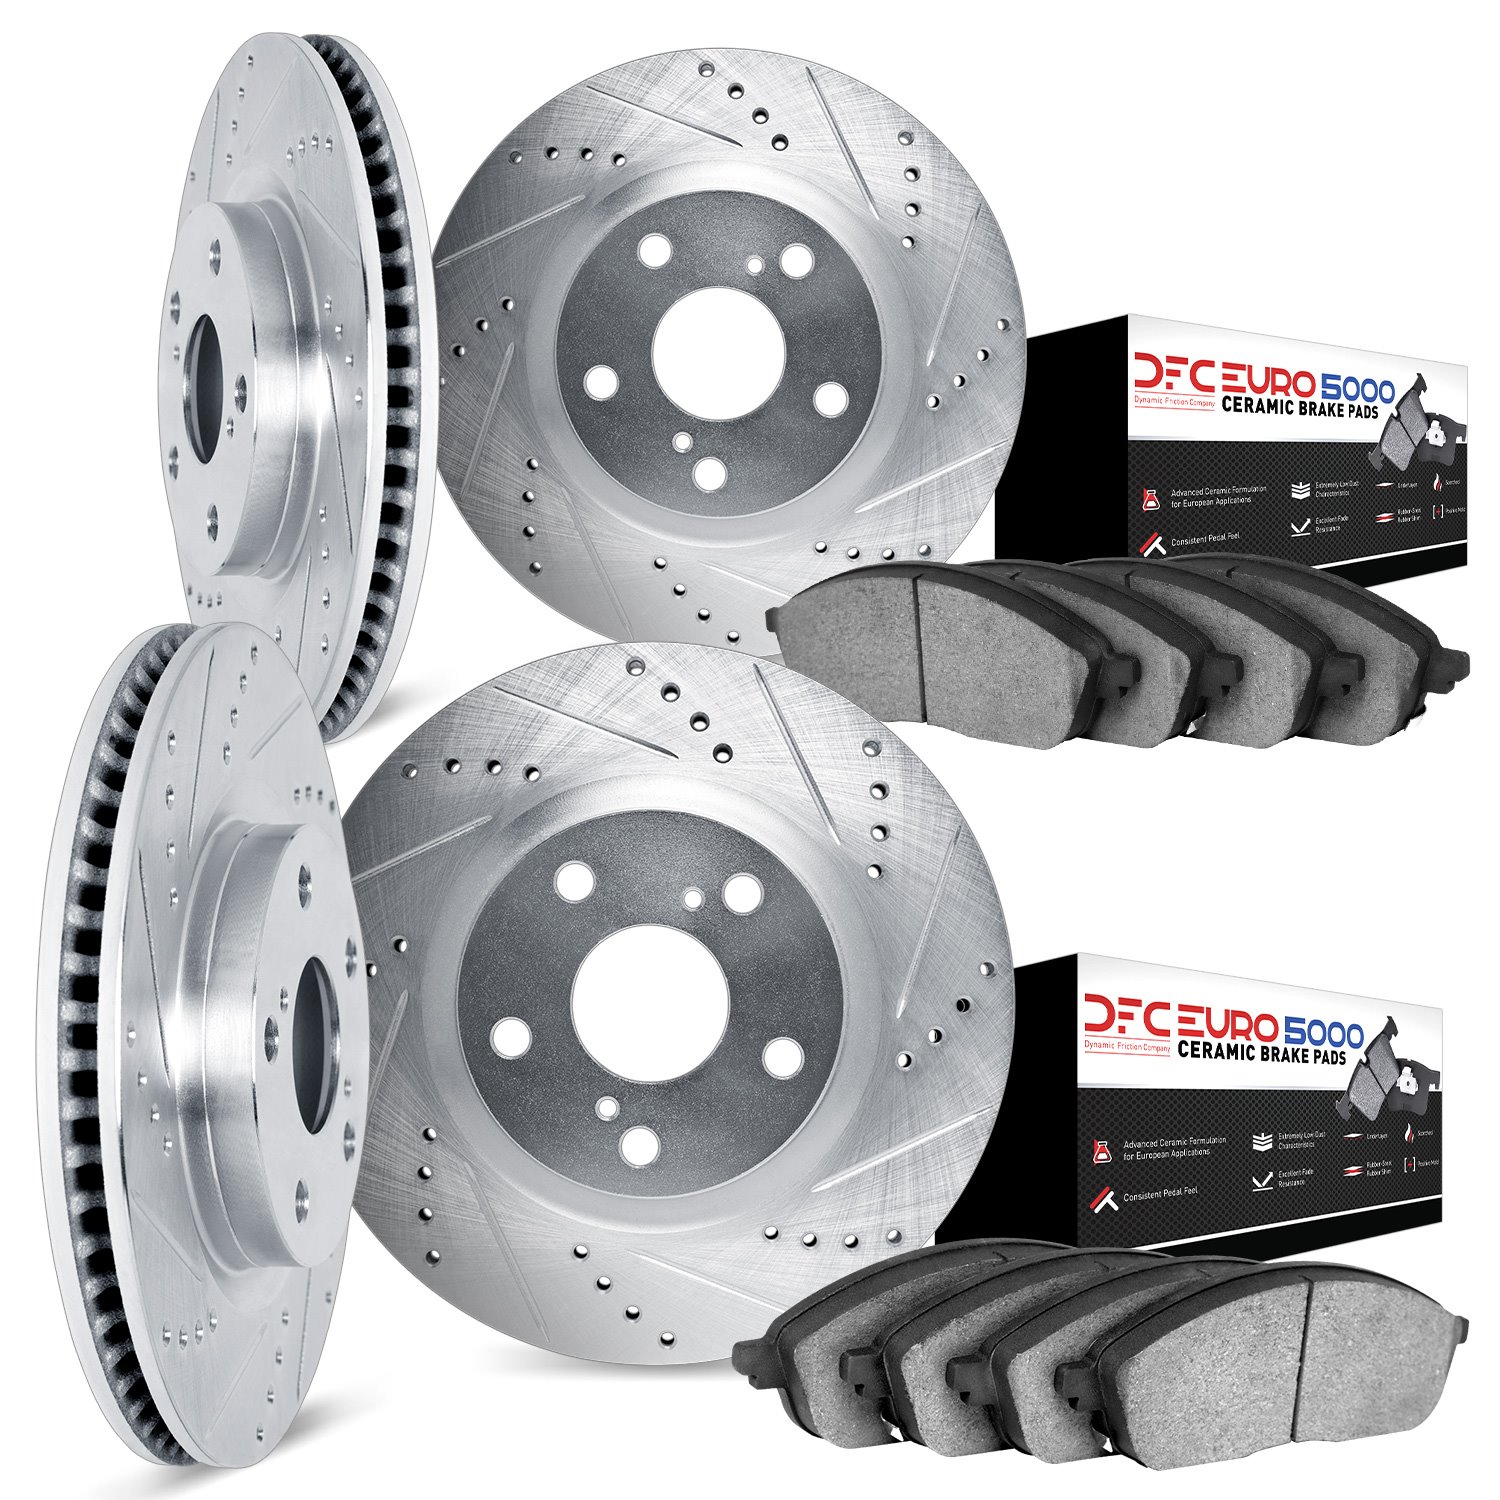 7604-31036 Drilled/Slotted Brake Rotors w/5000 Euro Ceramic Brake Pads Kit [Silver], Fits Select BMW, Position: Front and Rear